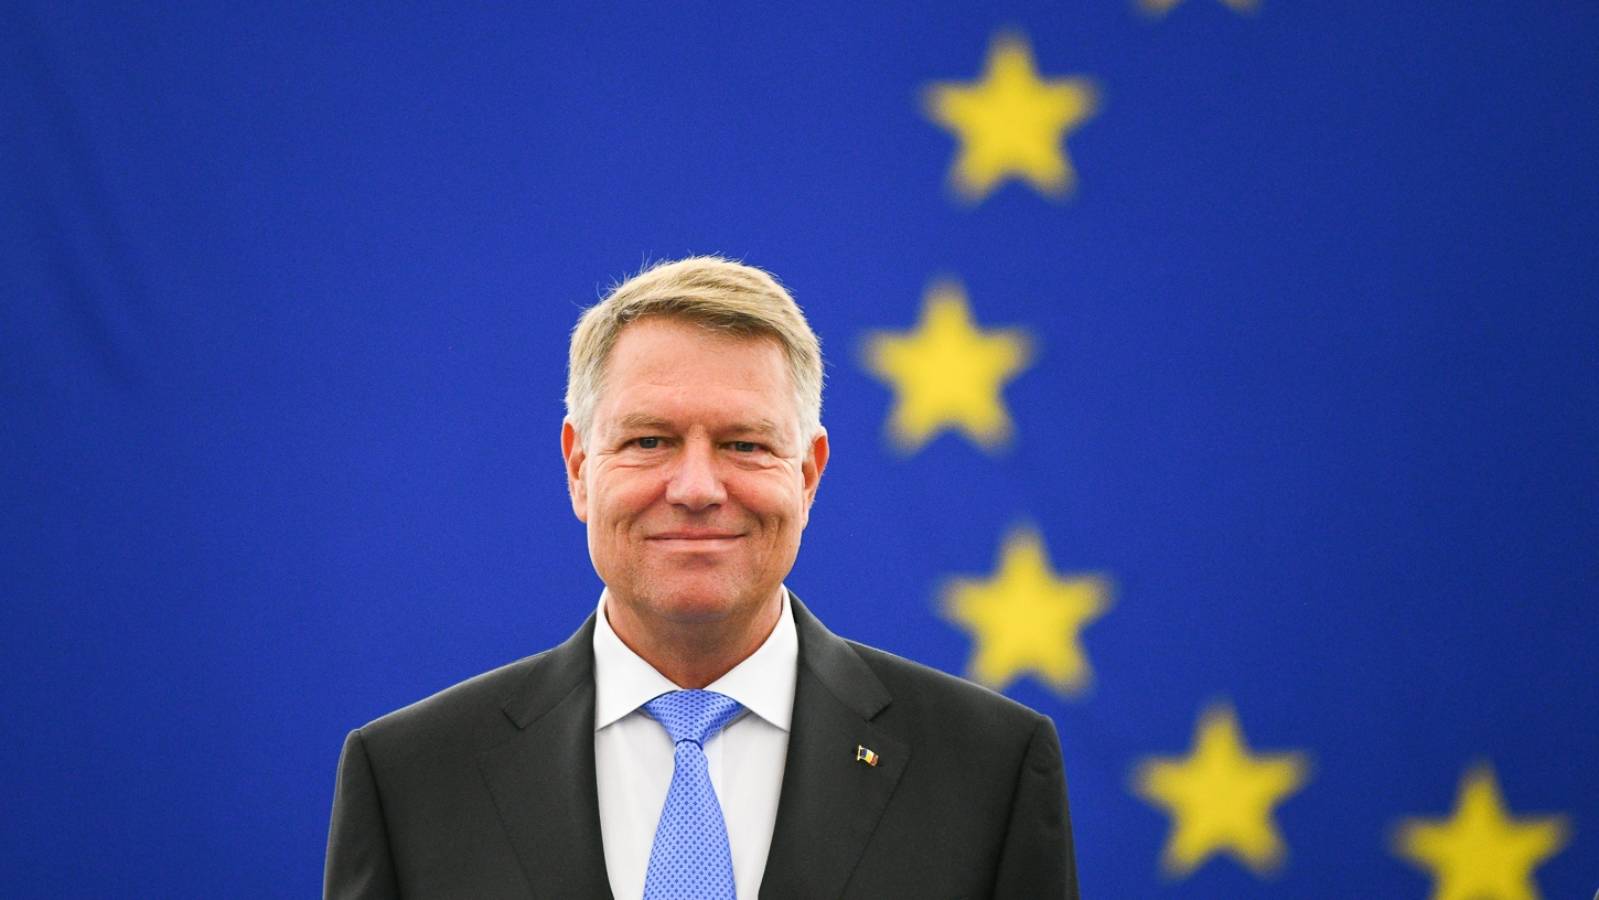 Klaus Iohannis normality